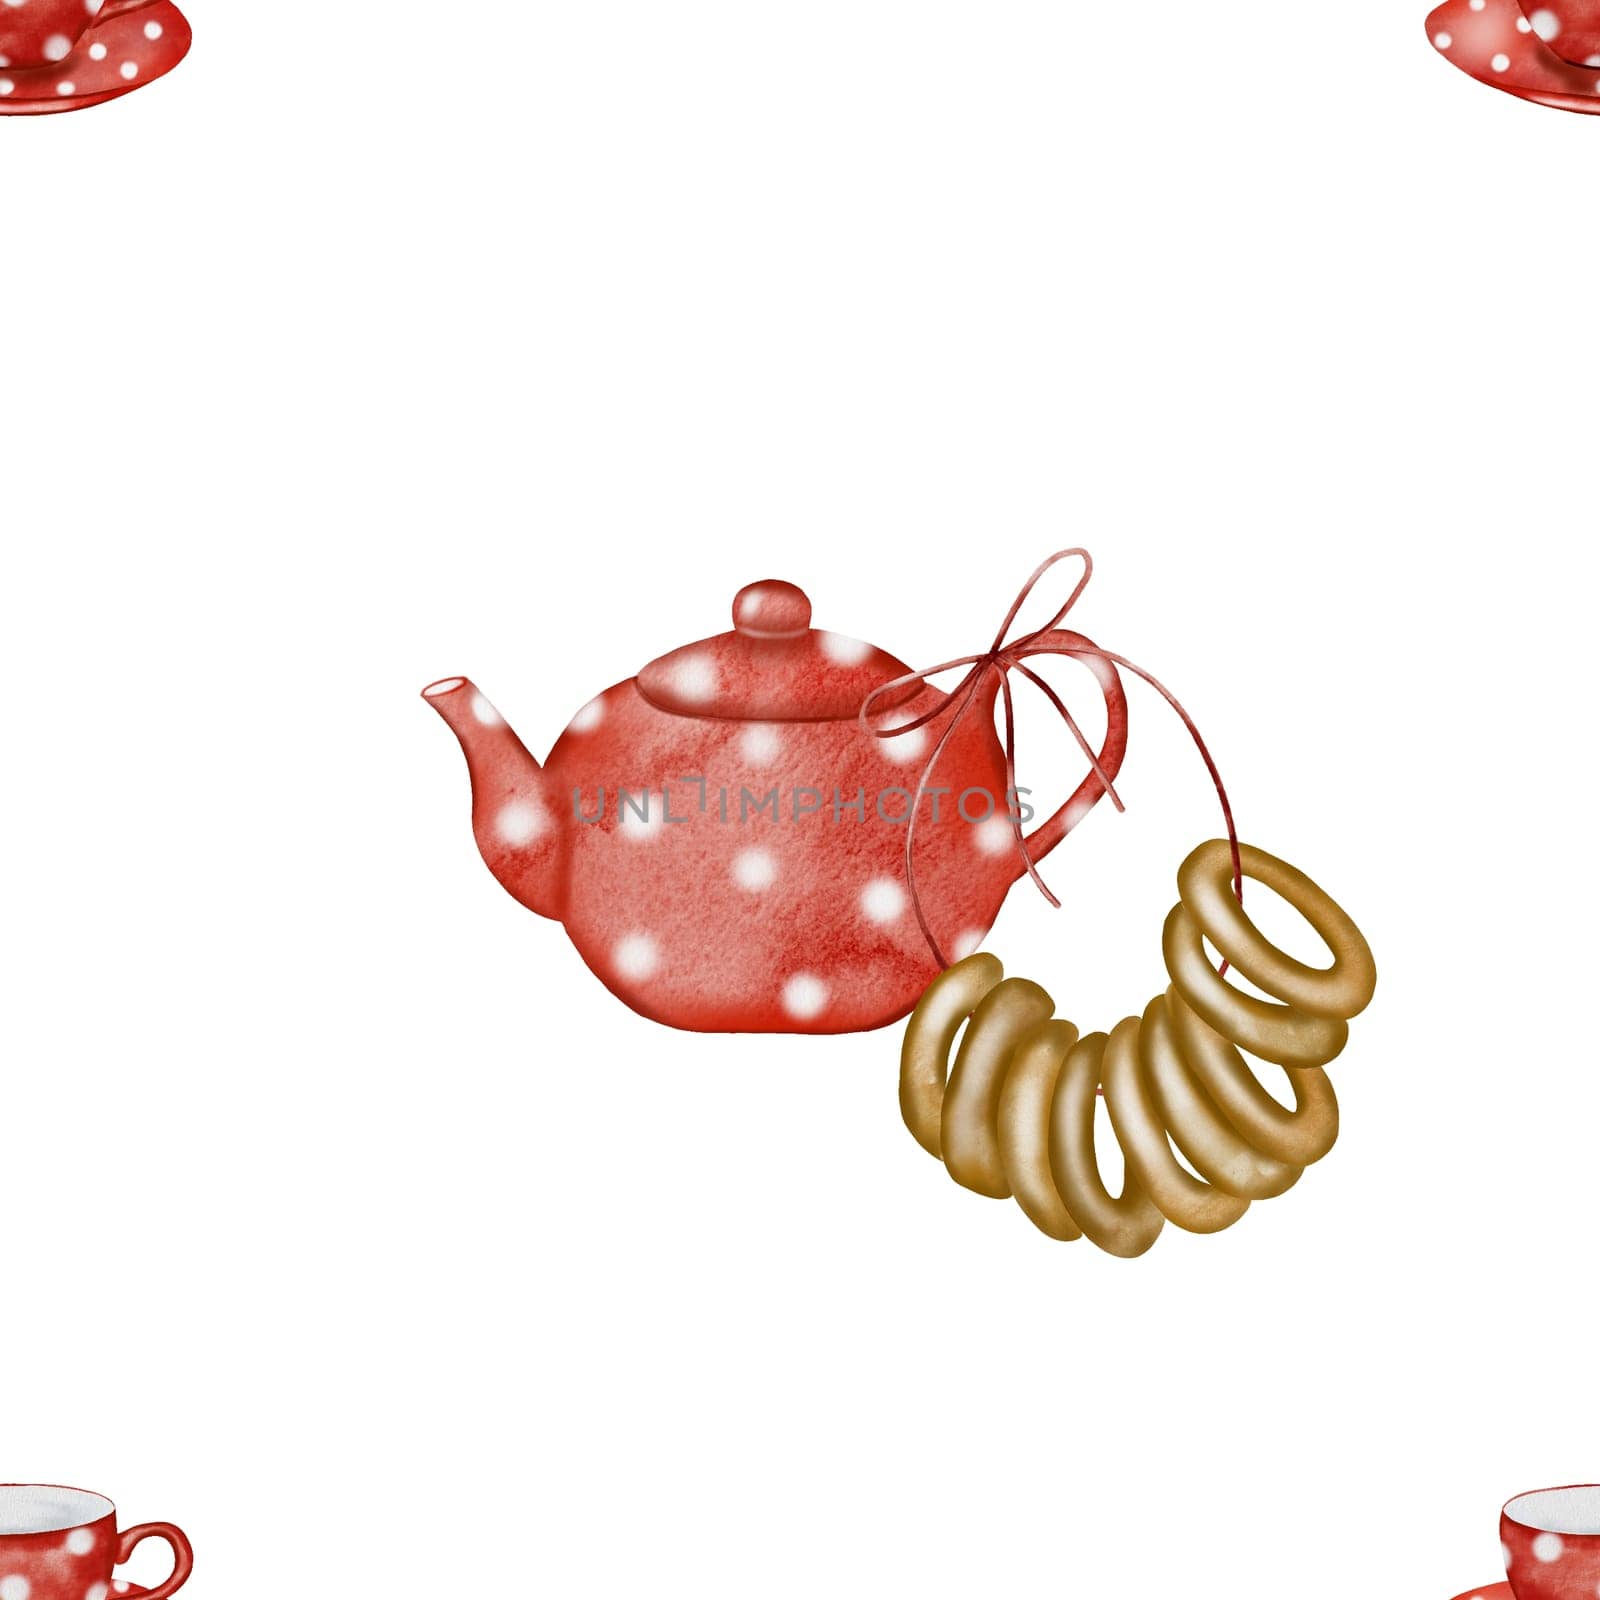 Pattern with a teapot and cups. Seamless pattern with bagels teapot and red cups with white polka dots. For home kitchen textiles and packaging for fresh baked goods stores. High quality illustration